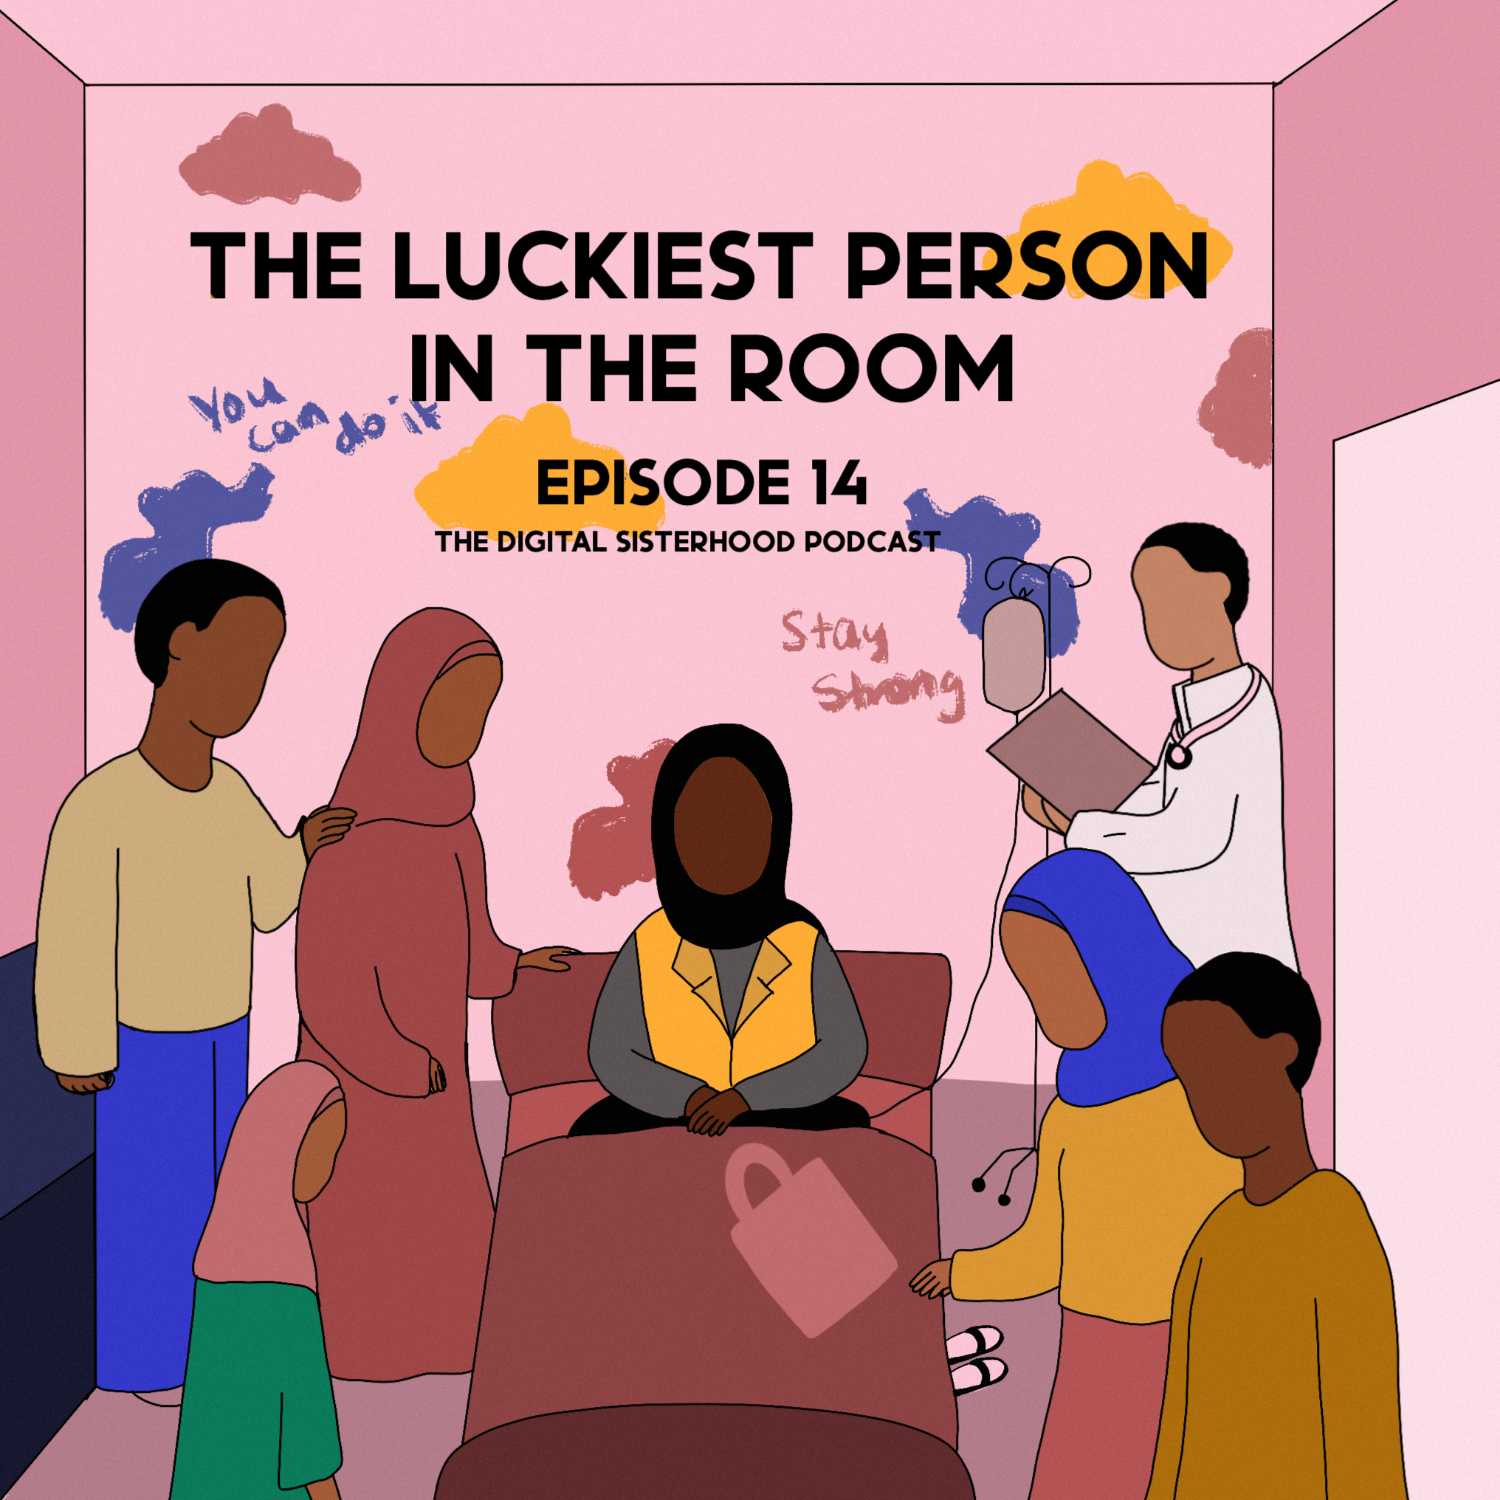 Episode Fourteen: The Luckiest Person in the Room